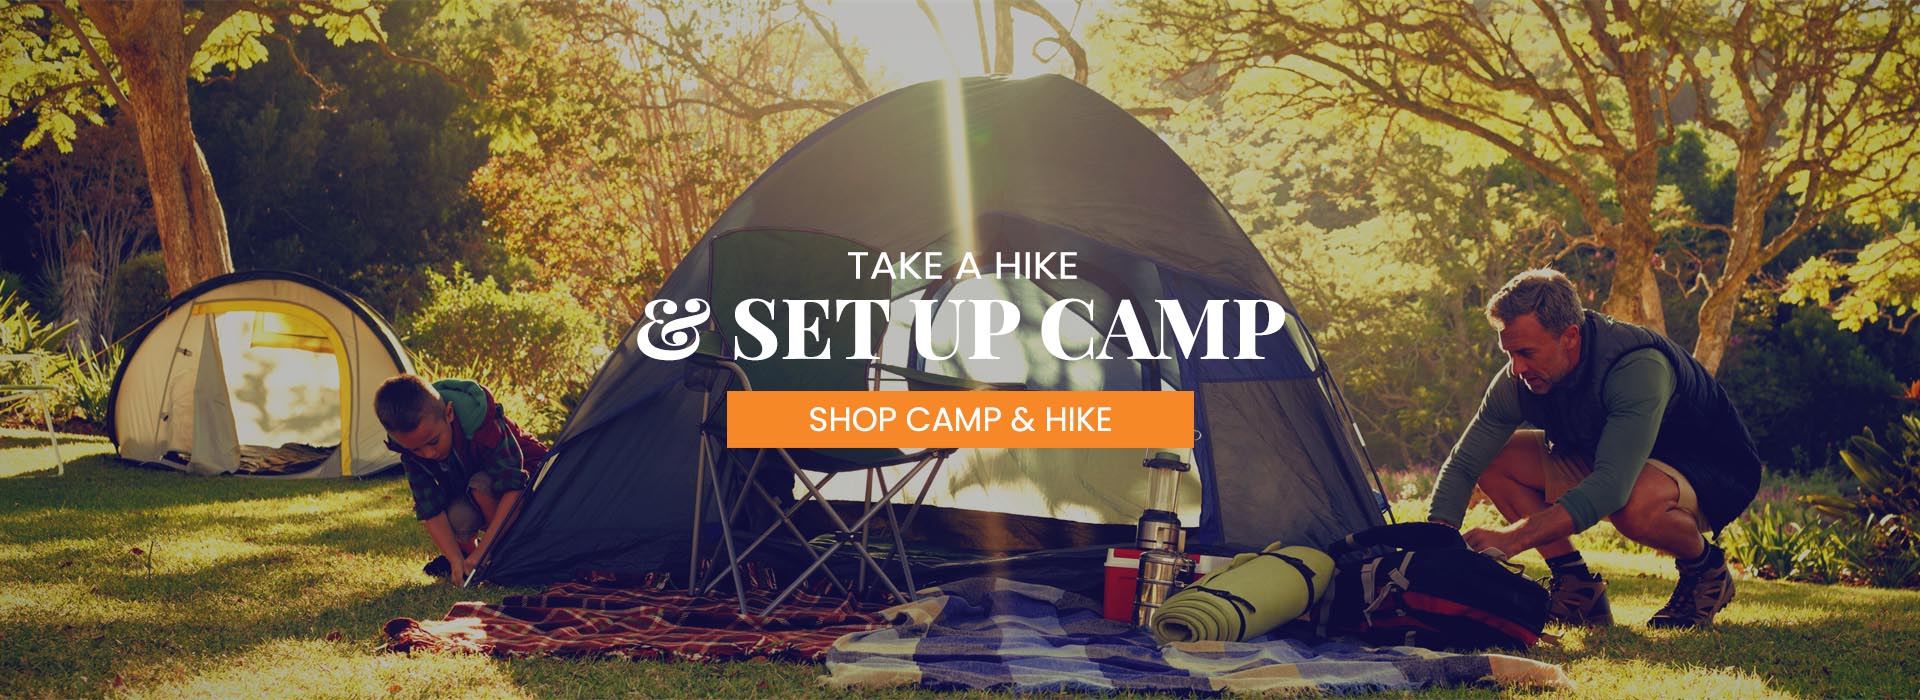 Take a hike and set up camp with new camping gear available at BlueZone Sports.